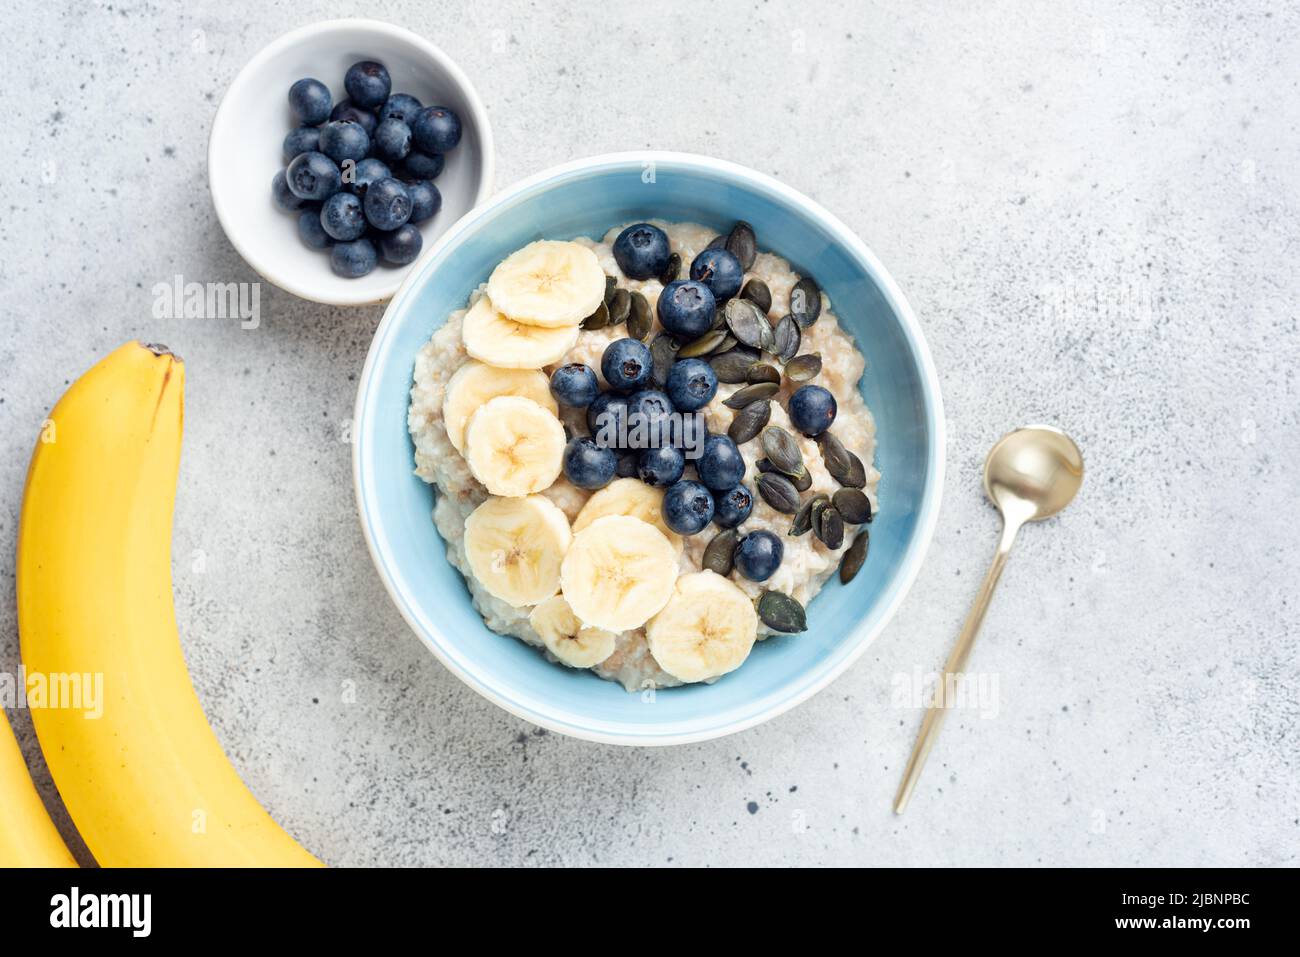 Oatmeal porridge with blueberries, bananas and pumpkin seeds on grey cocnrete background. Top view Stock Photo